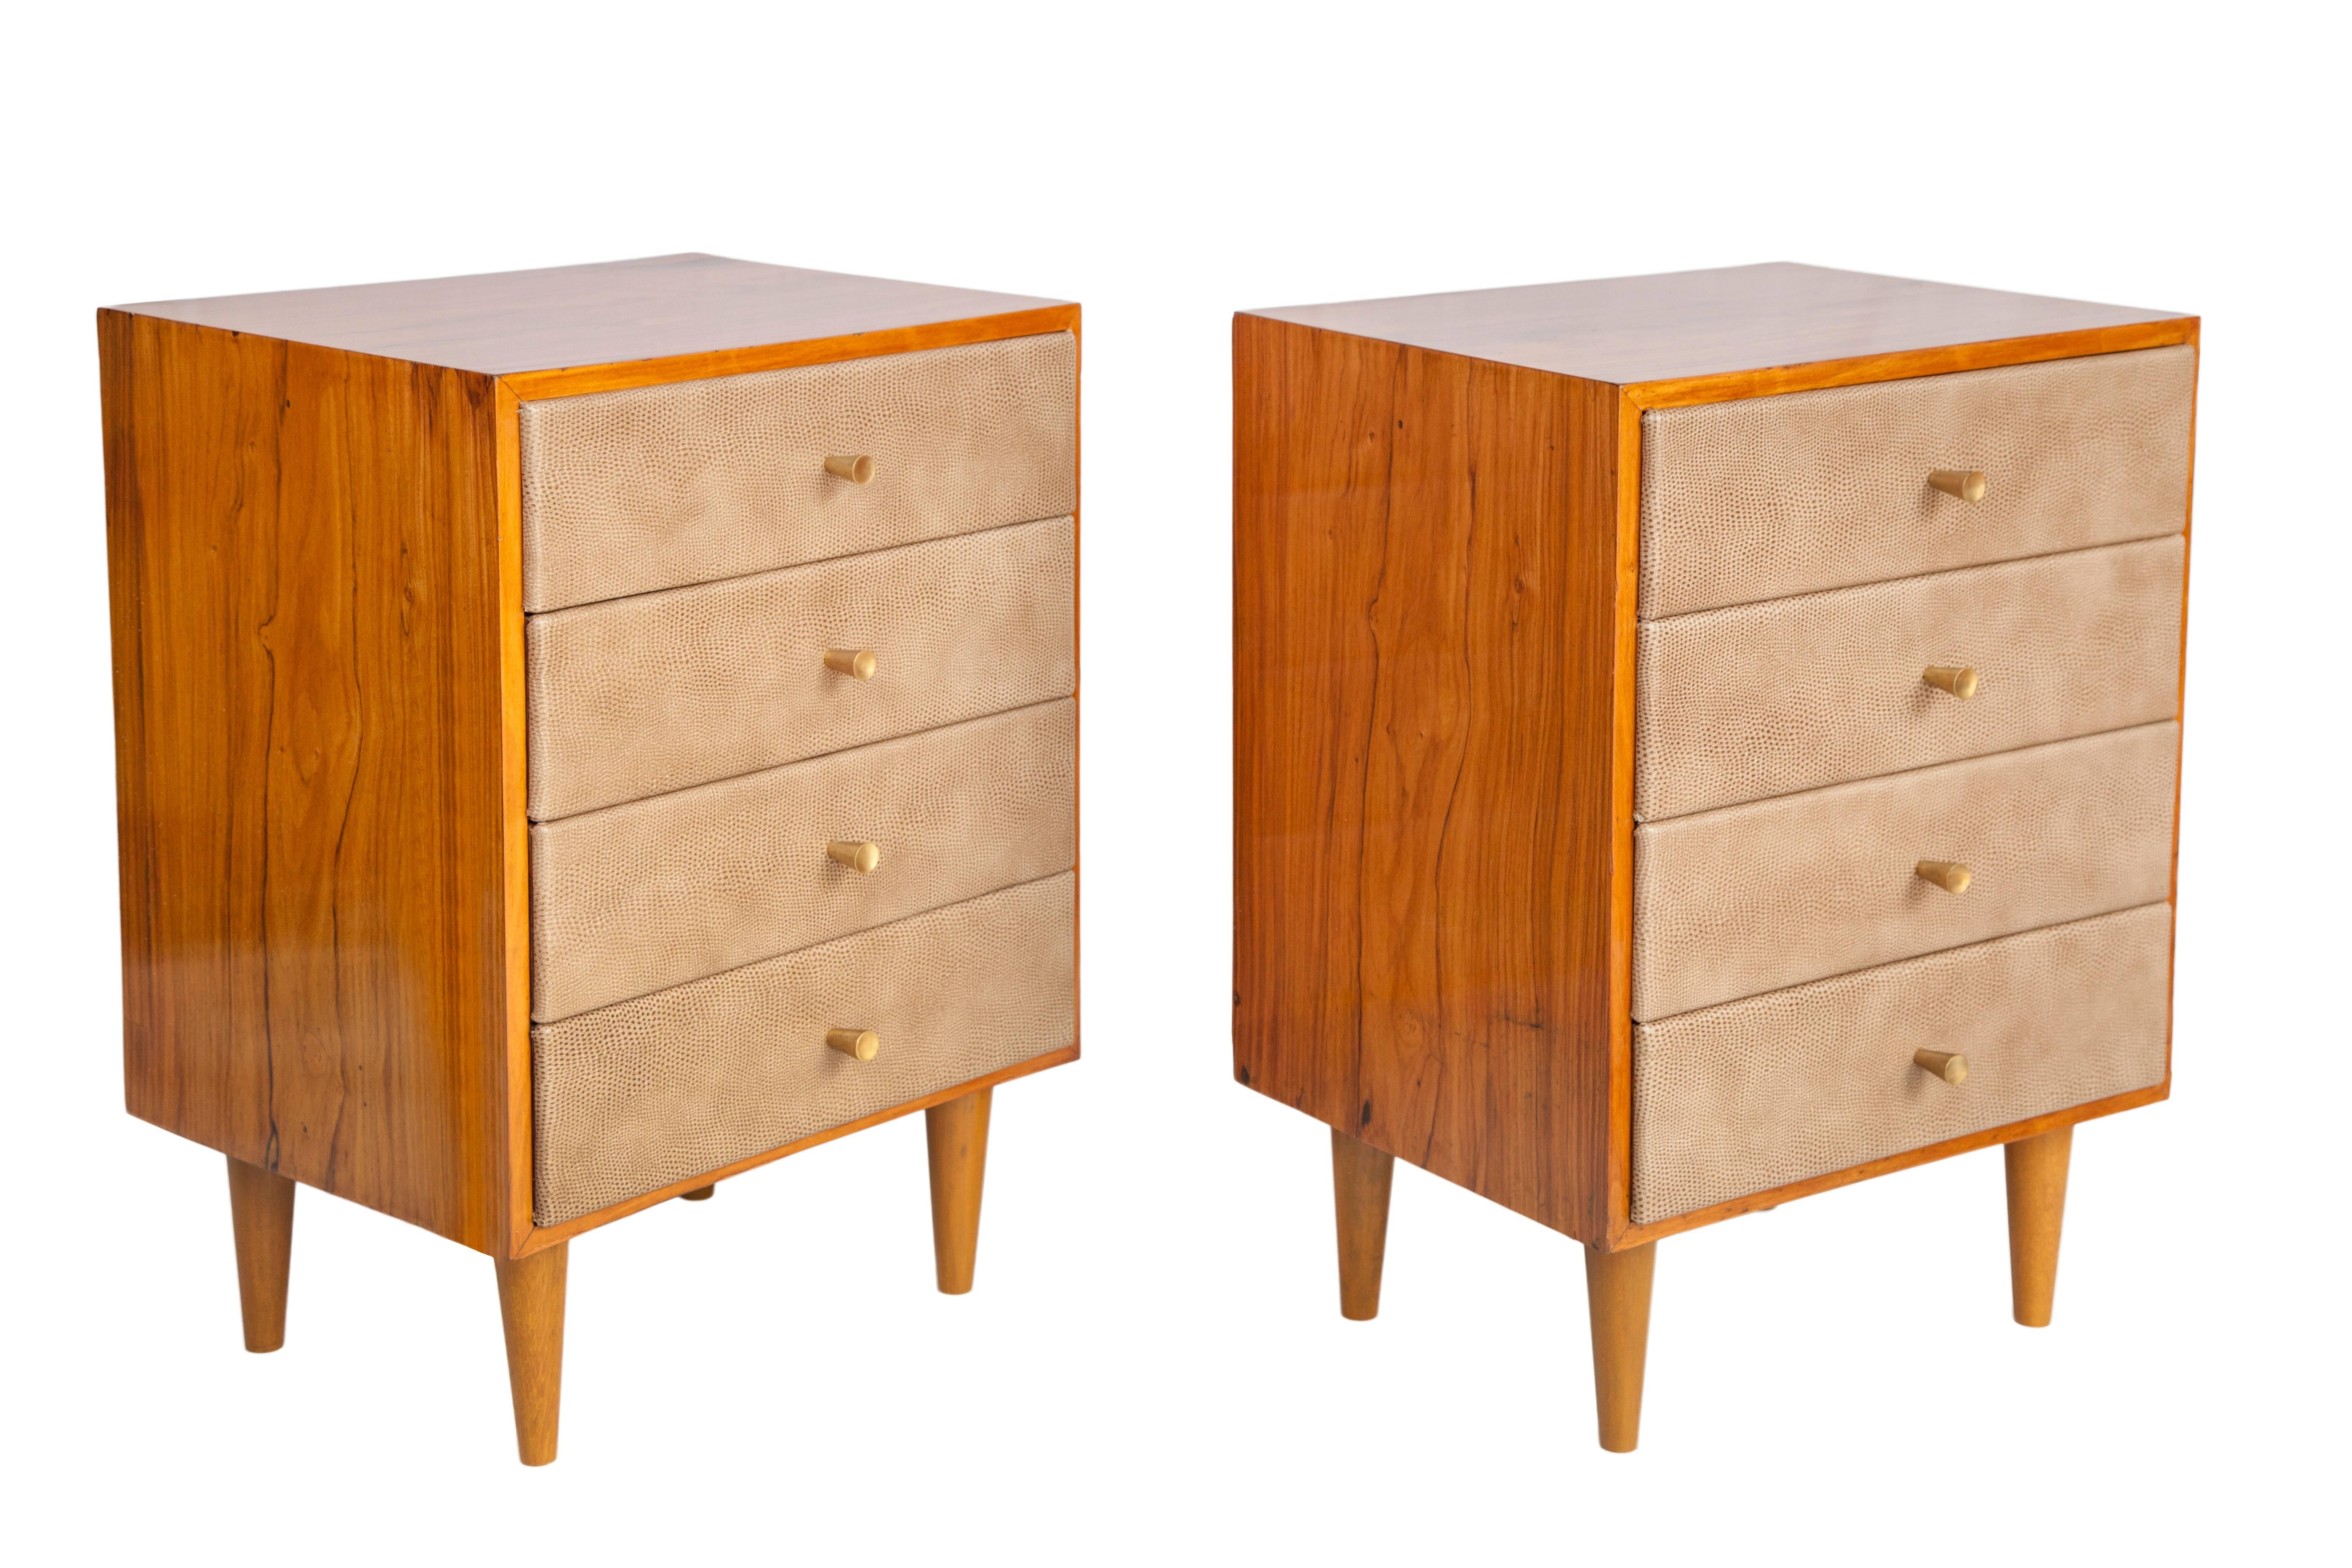 Midcentury dressers in Brazilian caviuna wood from the 1950s. Each has recently upholstered drawers with shagreen leatherette. Each has four drawers with a circular brass drawer pull in the centre. These dressers are each in good vintage condition